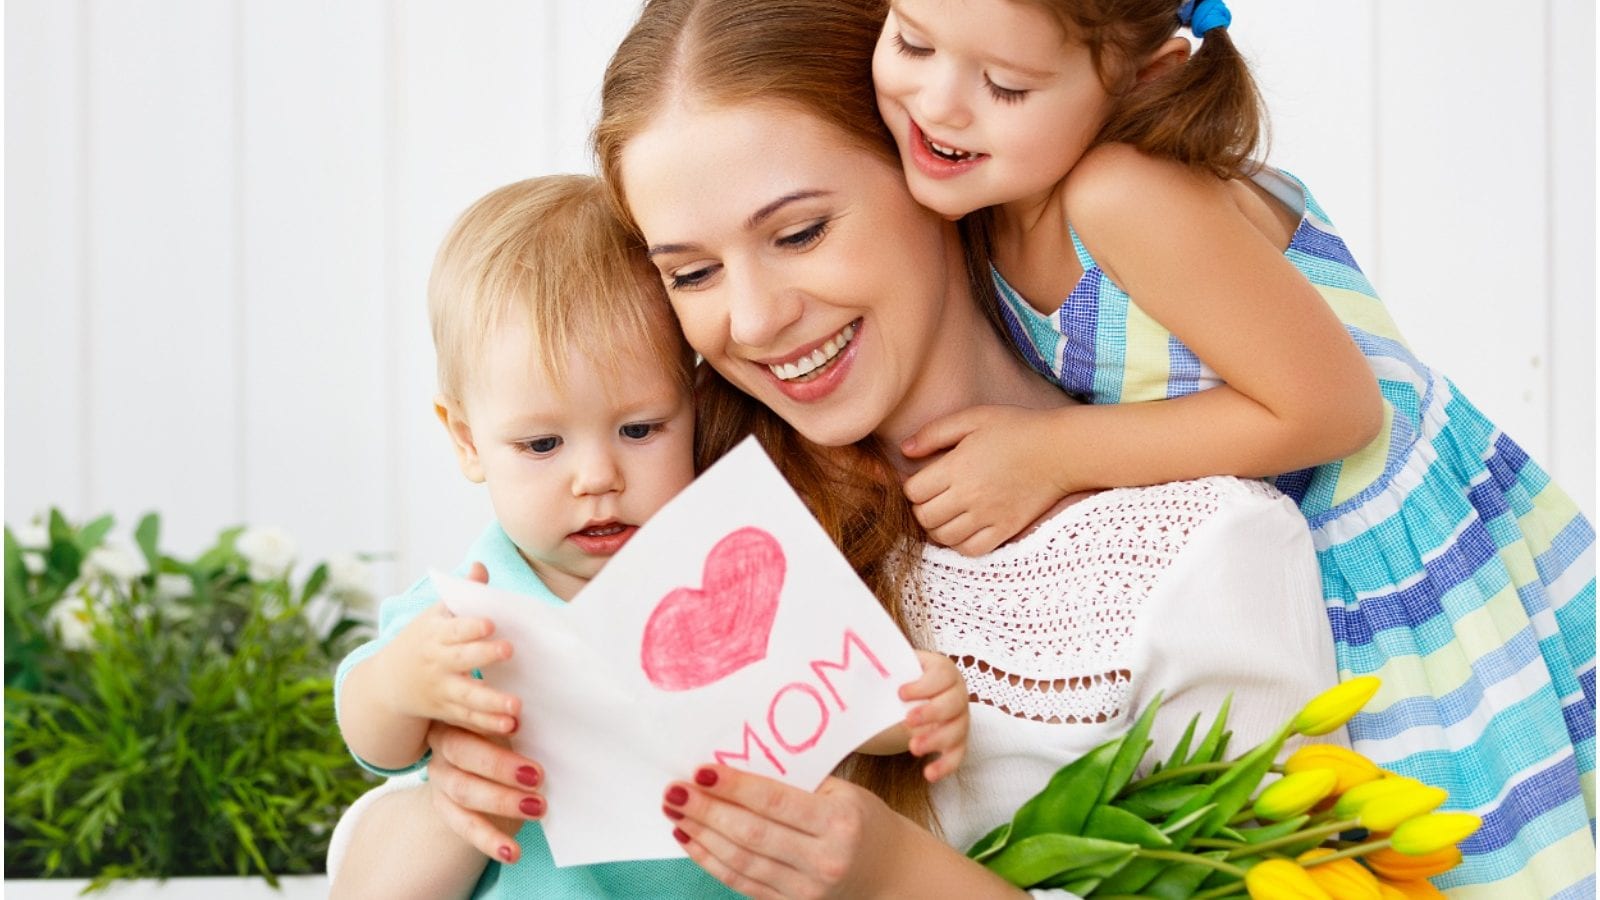 Mother's Day 2022 When Is Mother's Day In India? Date, Significance